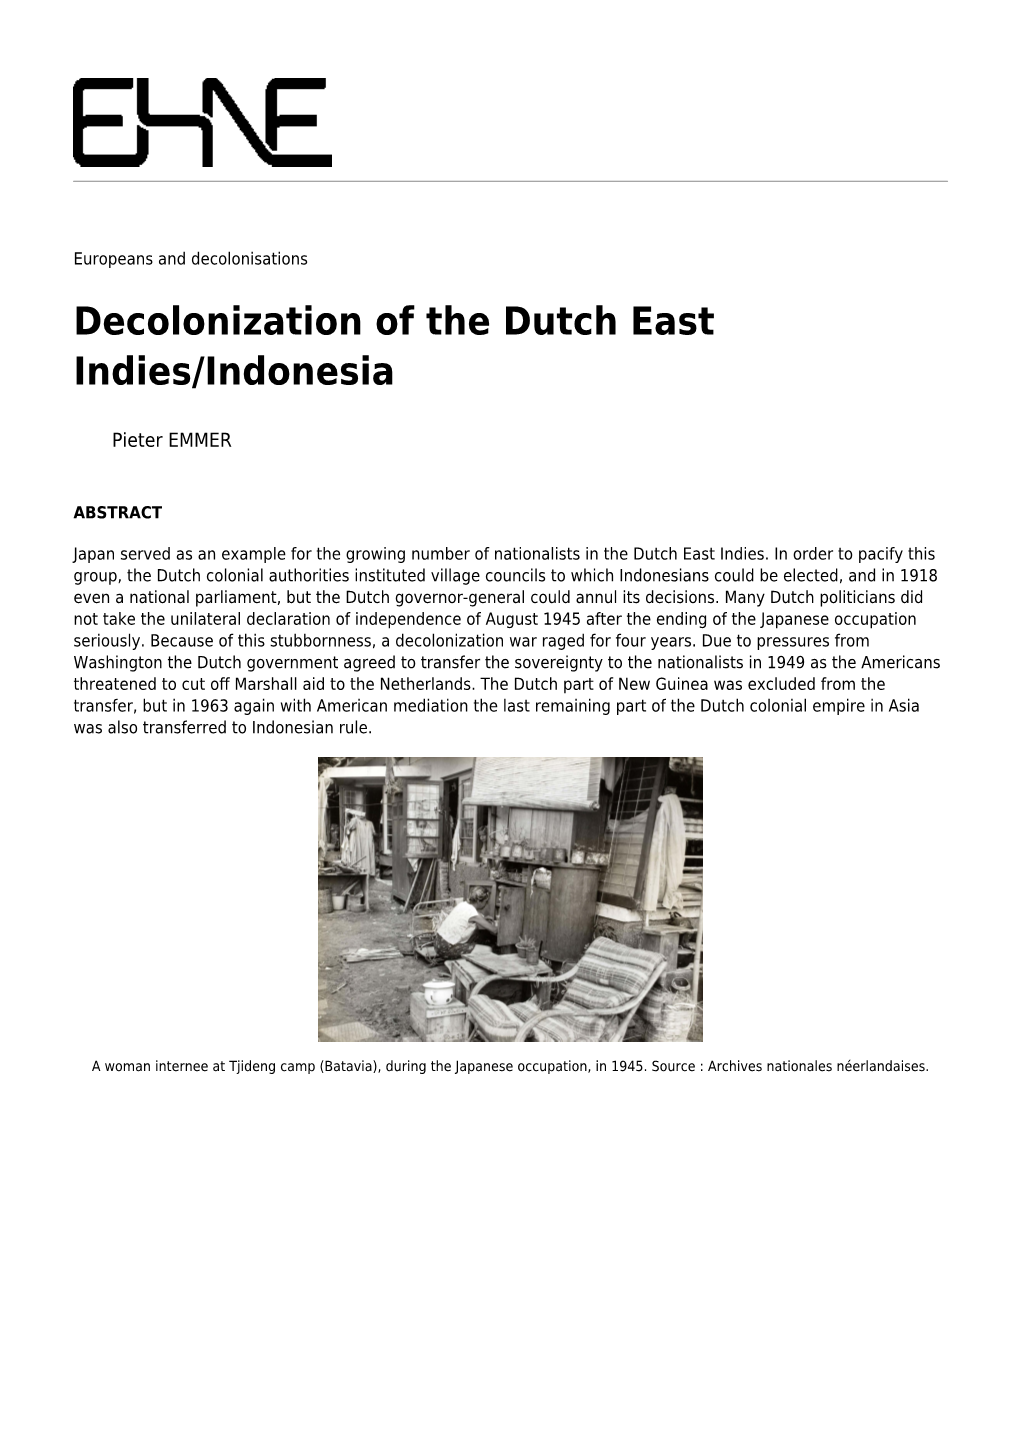 Decolonization of the Dutch East Indies/Indonesia